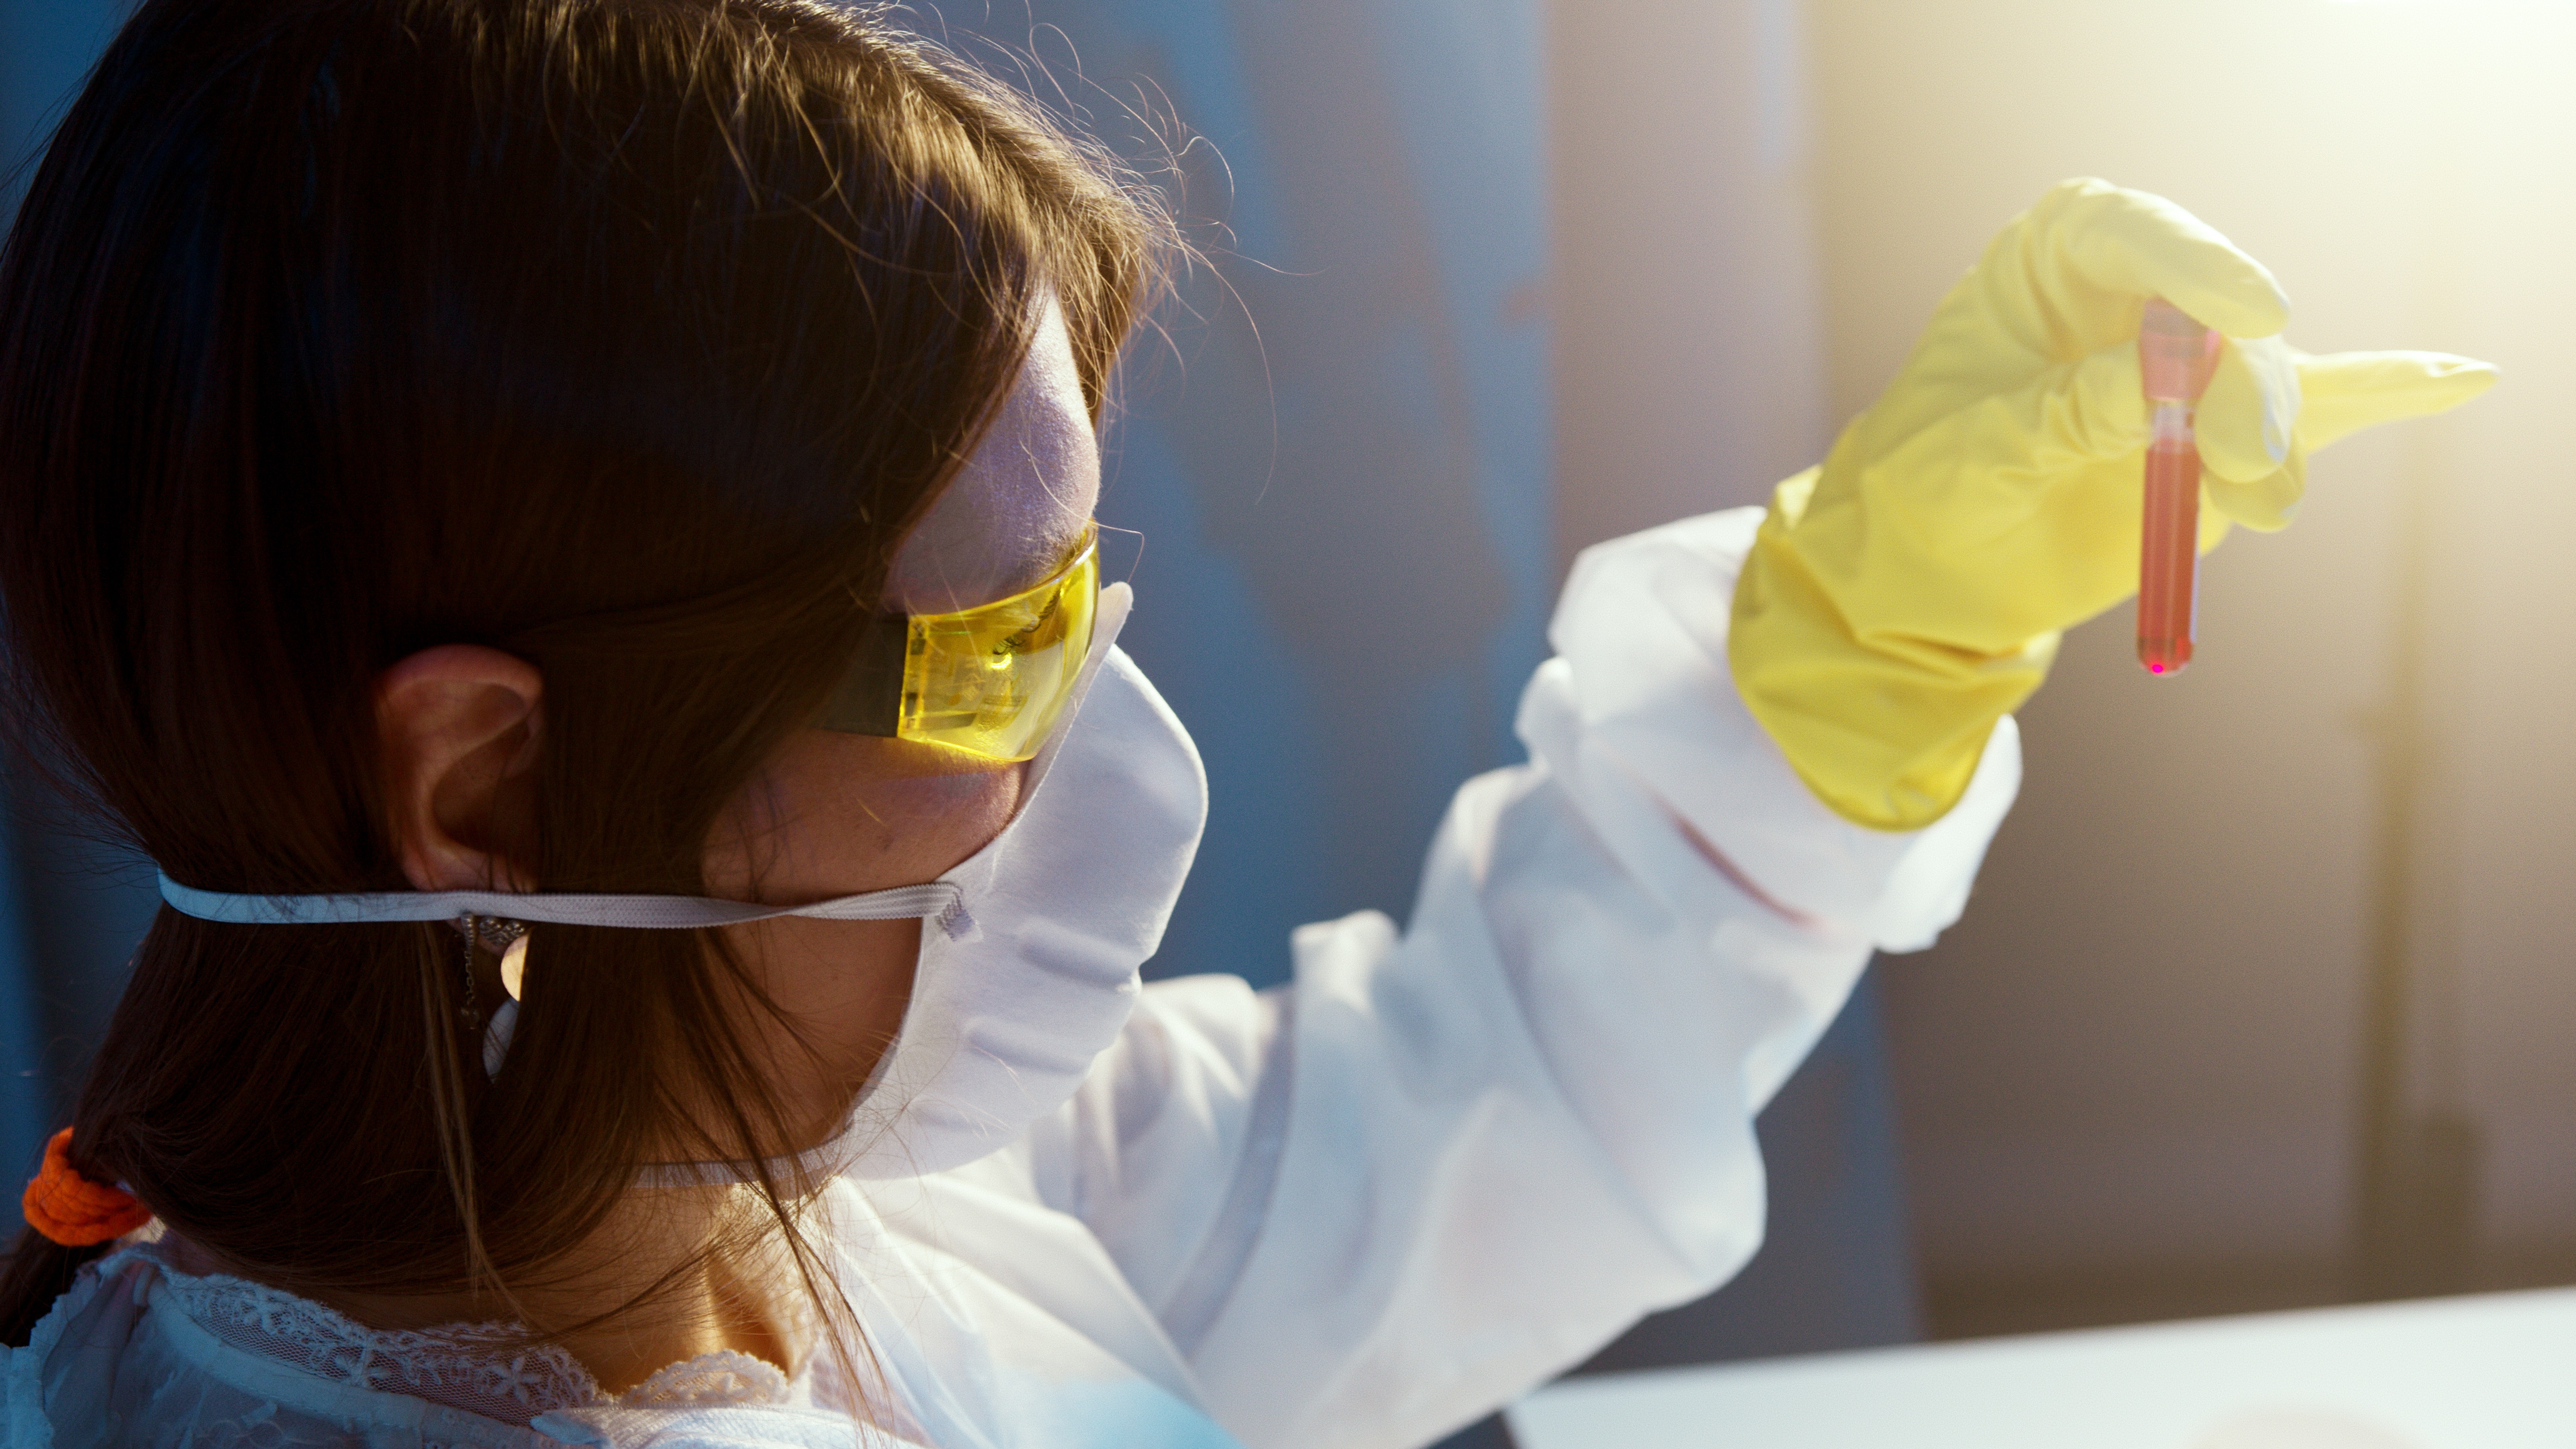 A female scientist wearing PPE including eye protection and a face mask examines a test tube.